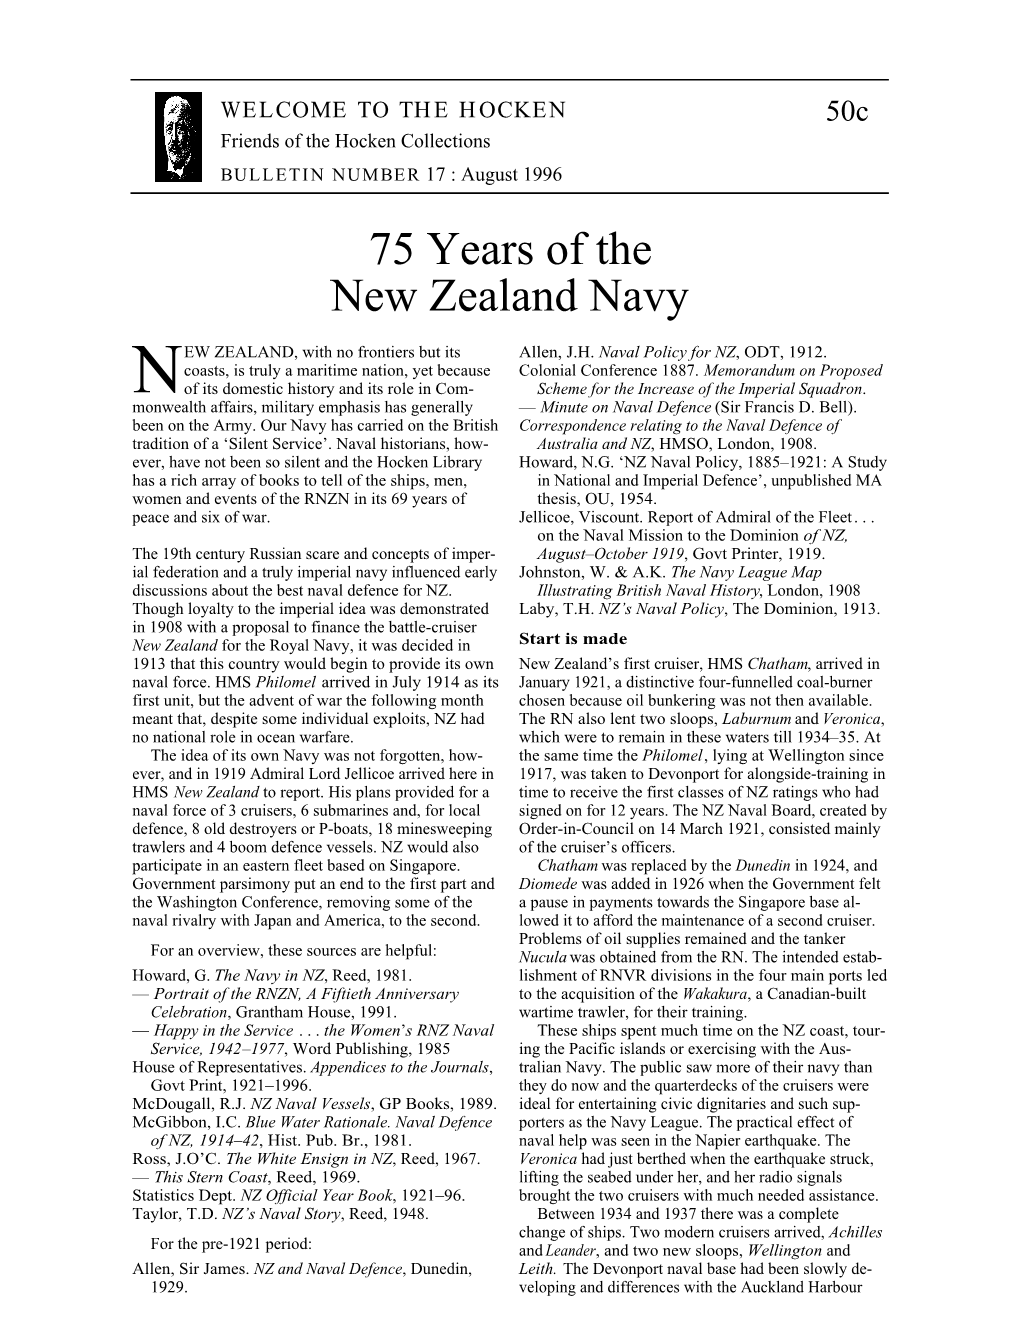 75 Years of the New Zealand Navy